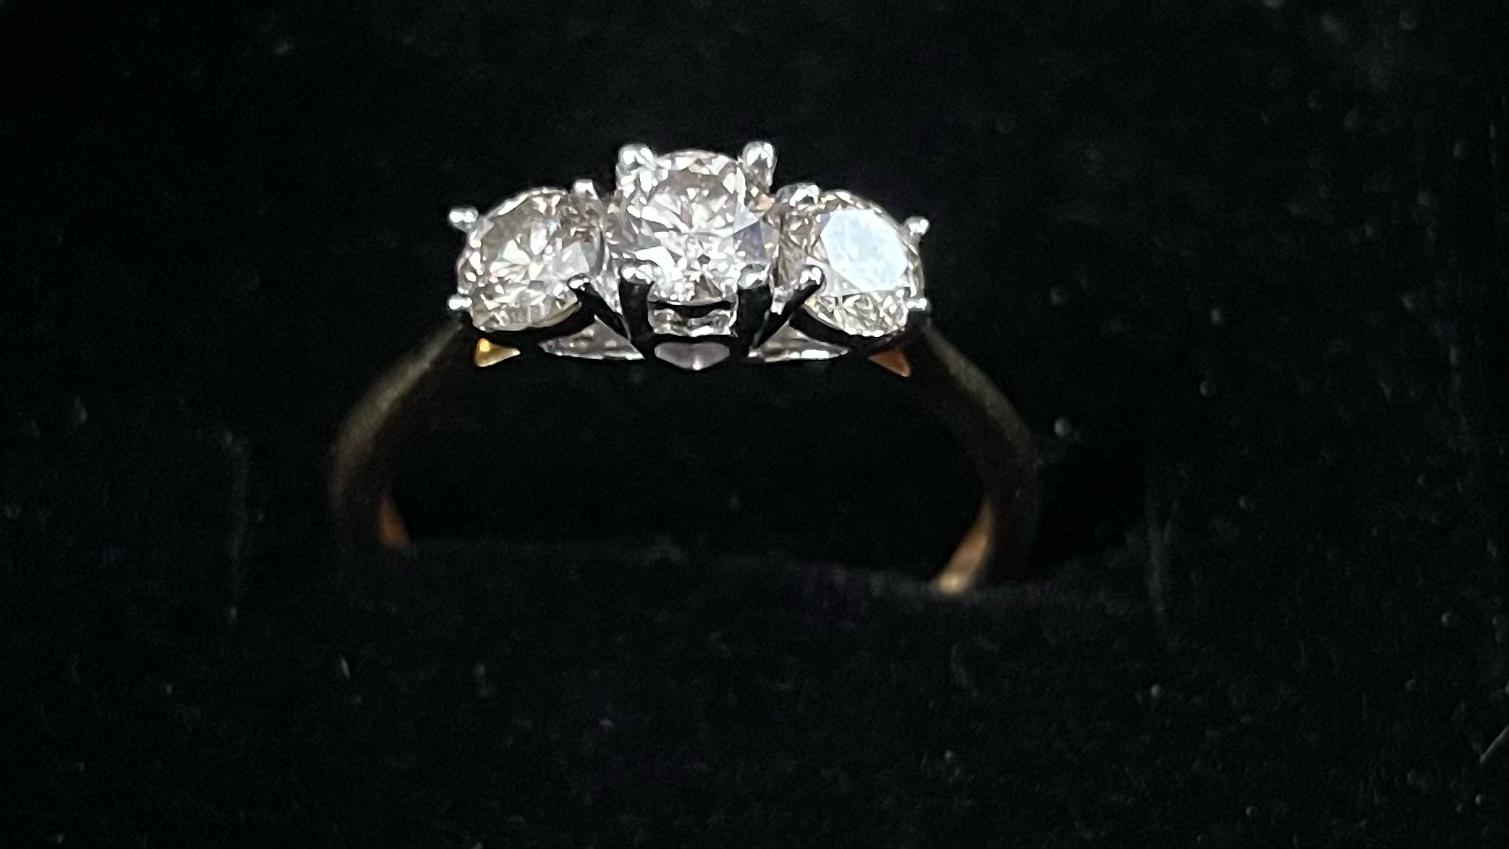 Beautiful Natural 1.09 CT Diamond Ring With 18k Gold